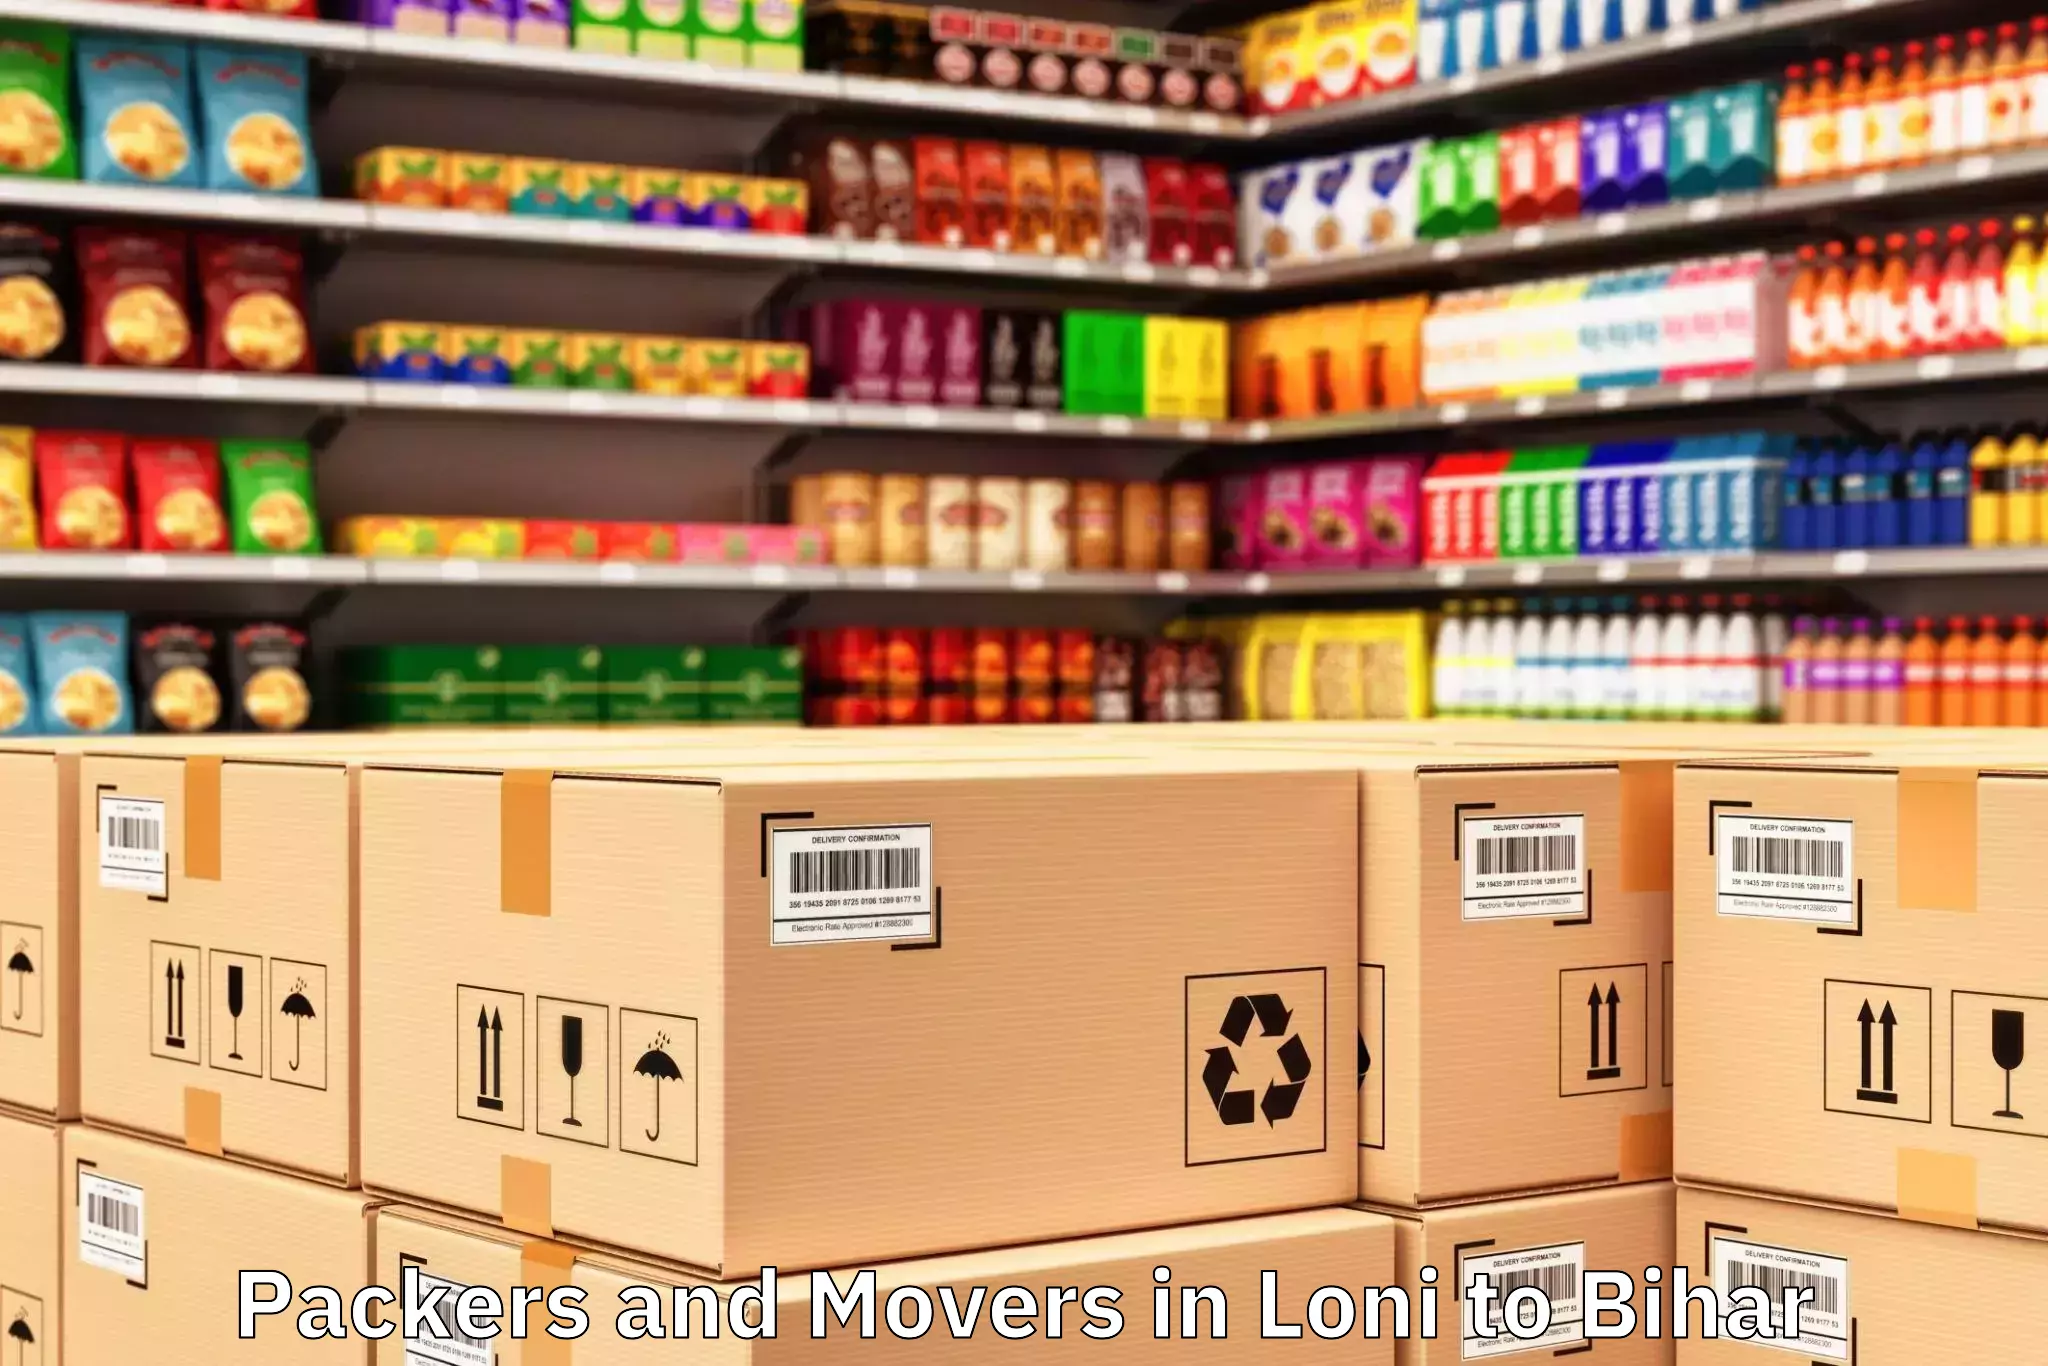 Reliable Loni to Ziradei Packers And Movers